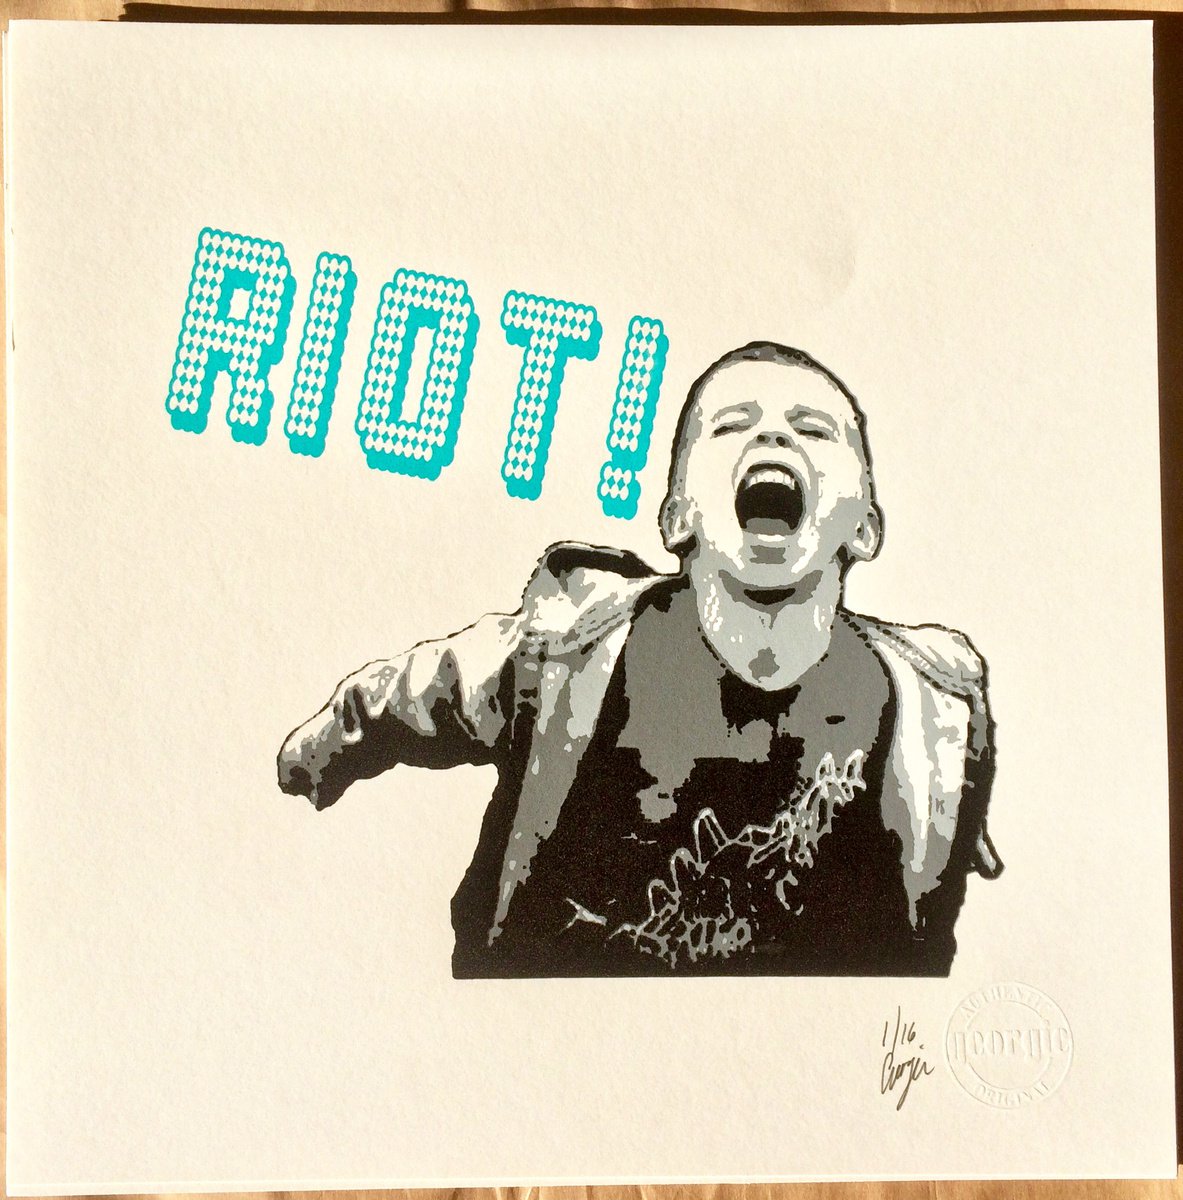 RIOT! 2019 editions. by Georgie